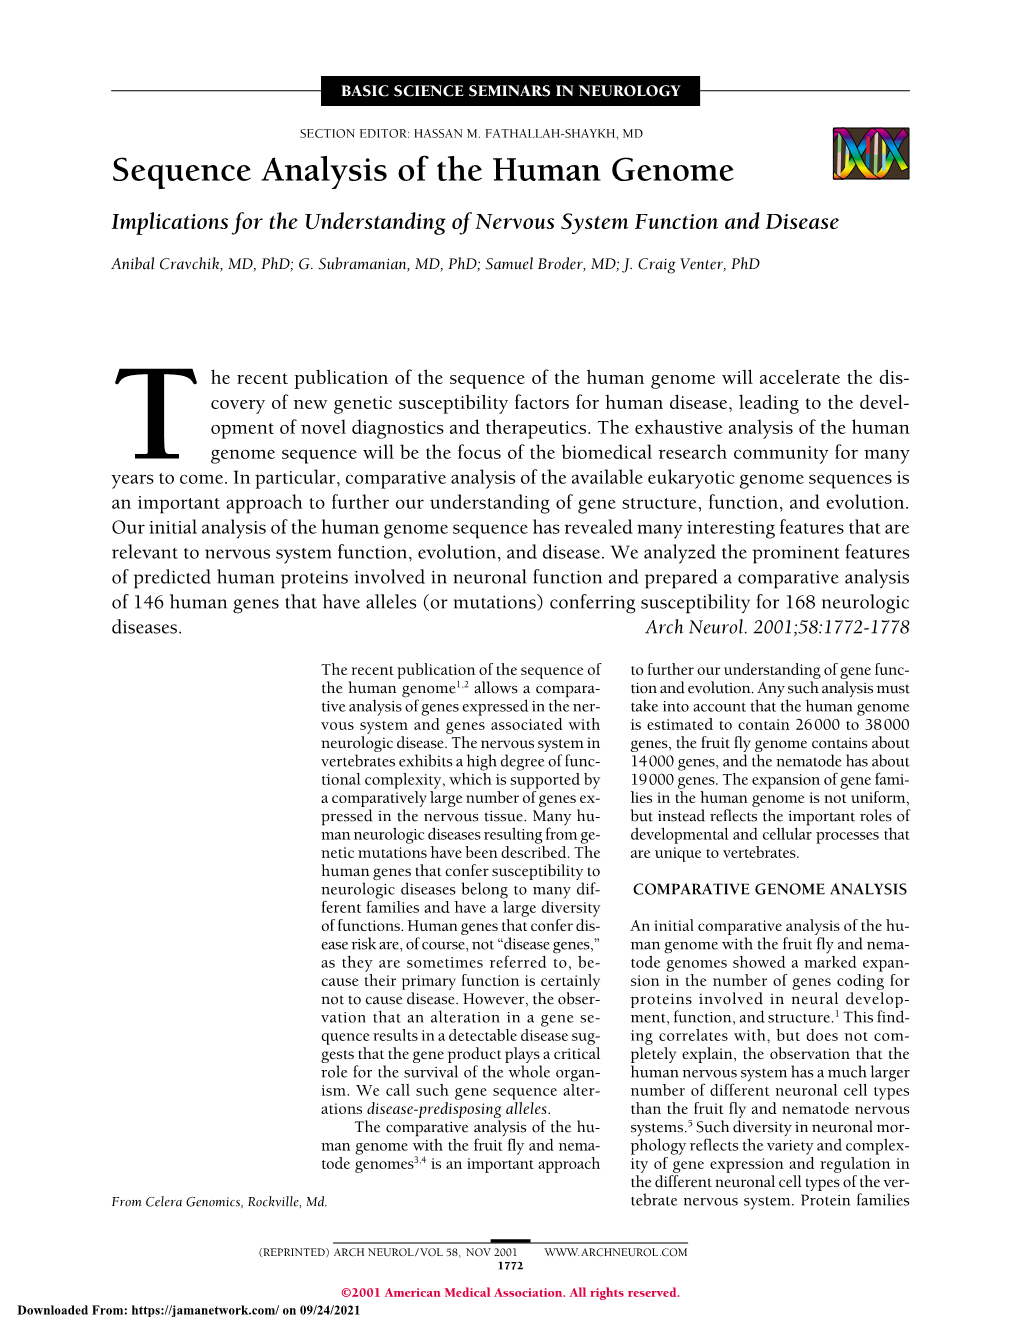 Sequence Analysis of the Human Genome Implications for the Understanding of Nervous System Function and Disease